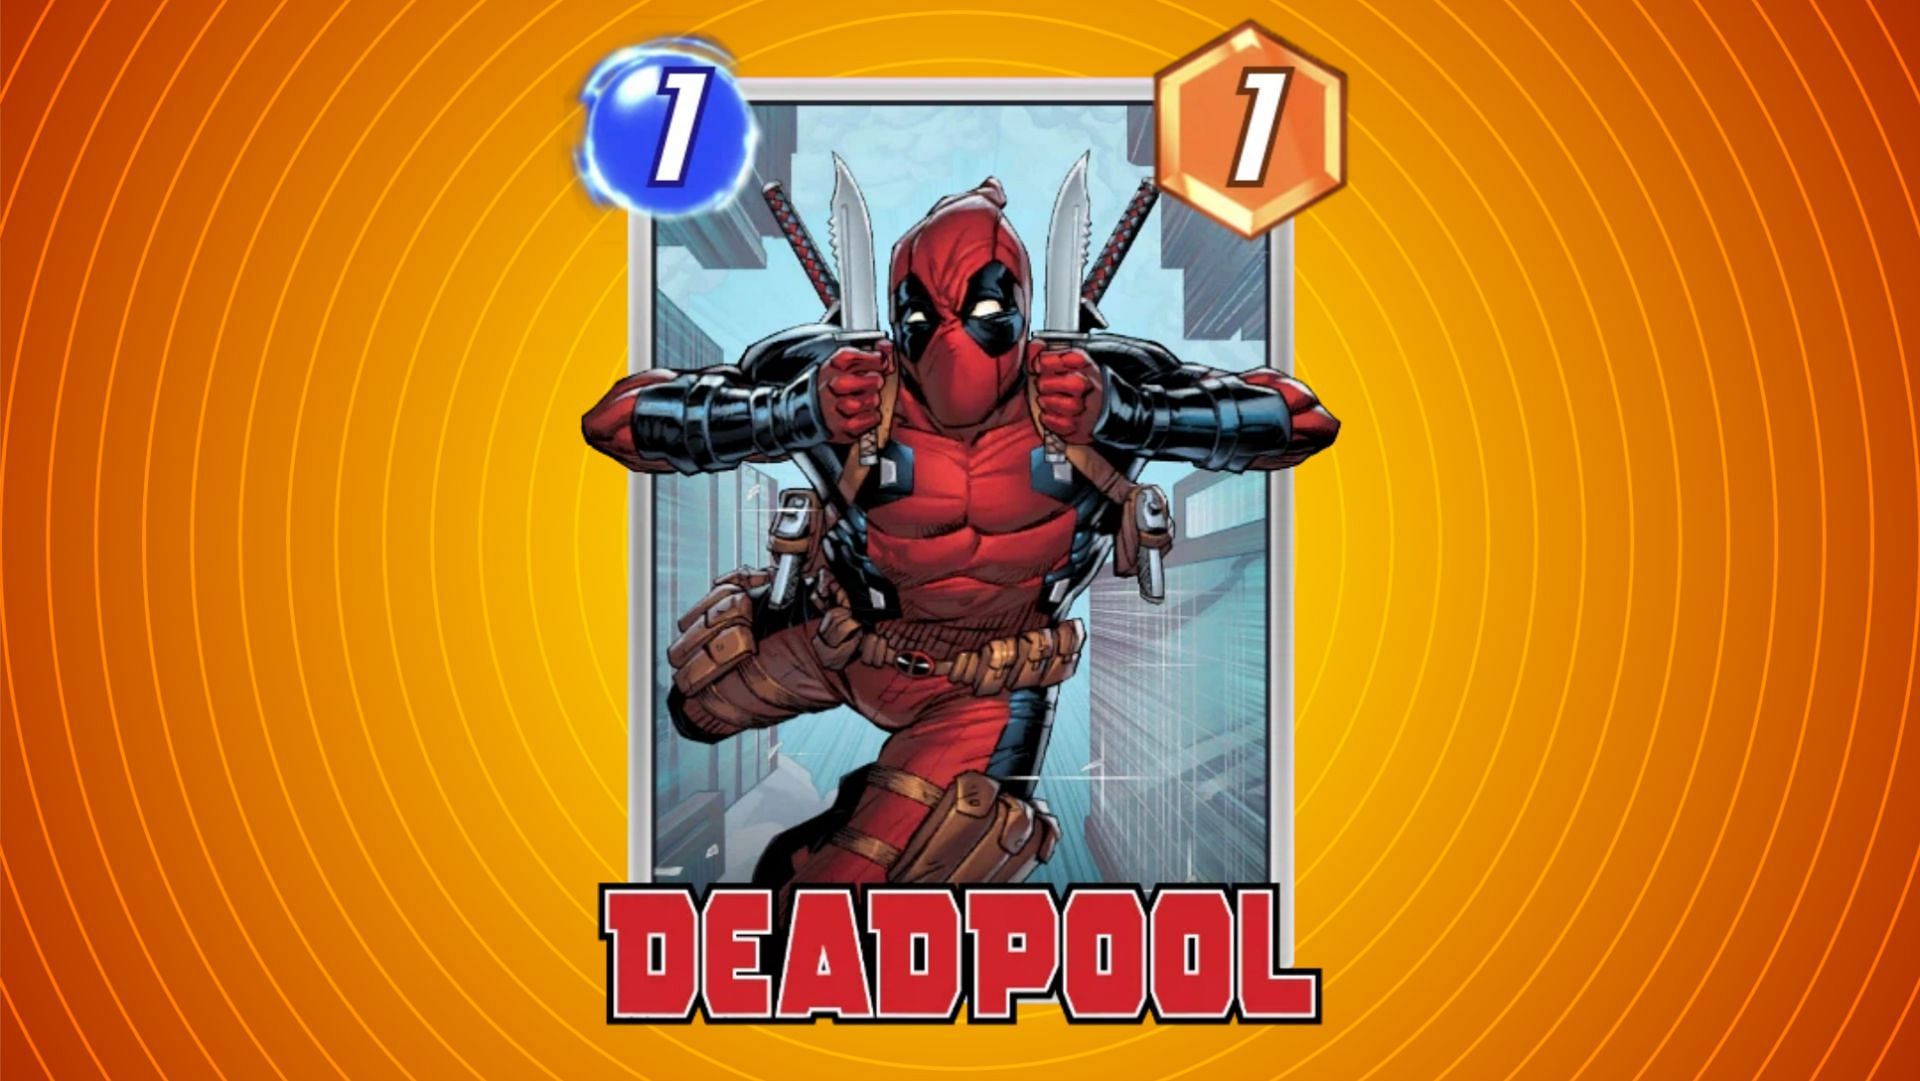 Deadpool, as depicted by the in-game card art (Image via marvelsnap.io)